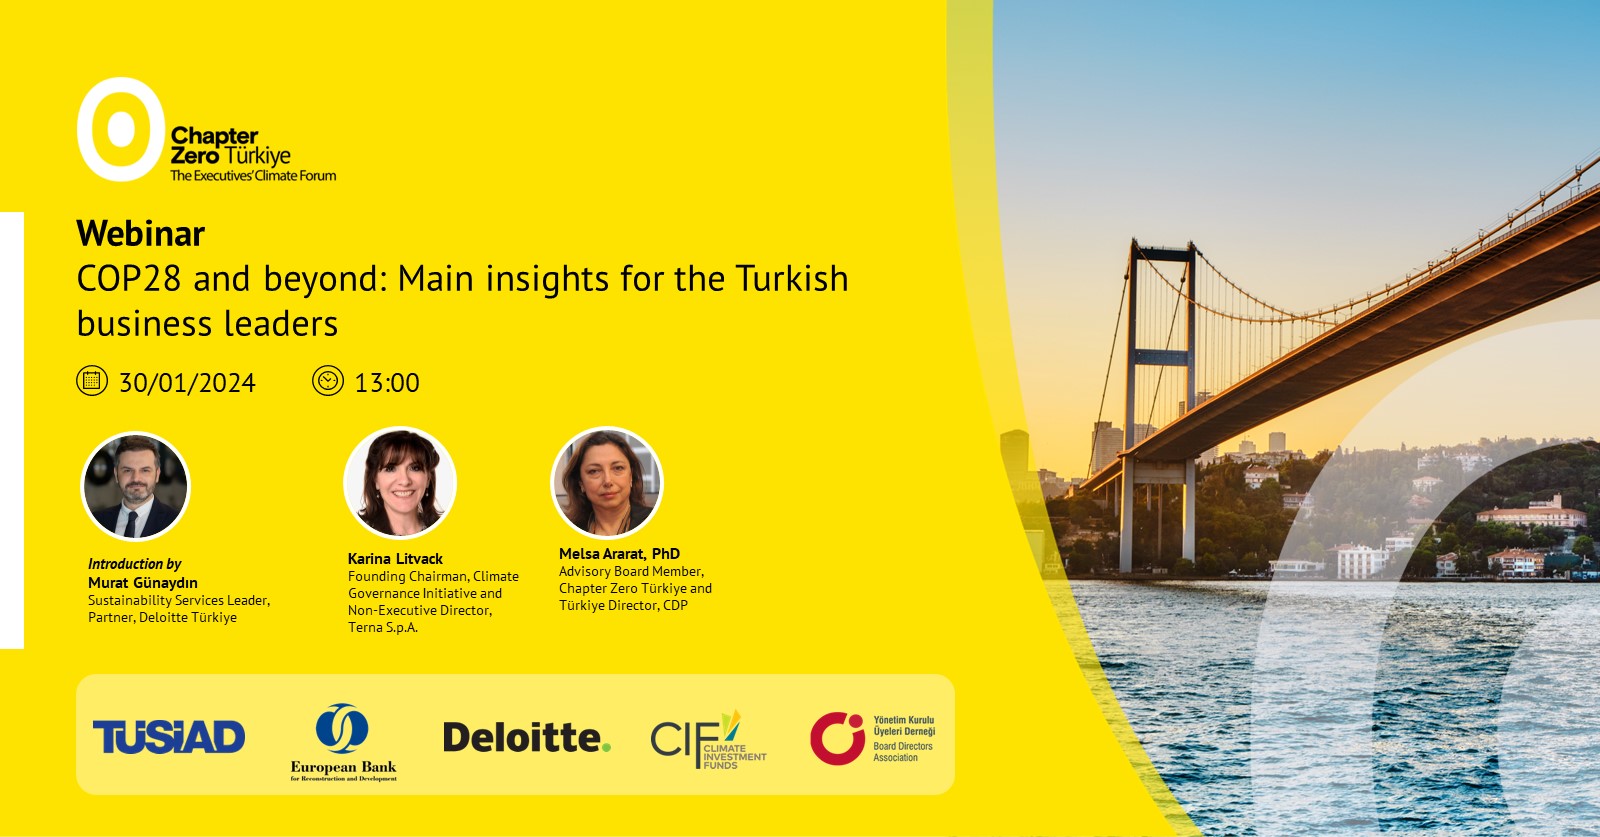 A webinar titled “COP28 and beyond: Main insights for the Turkish business leaders” was organized in cooperation with Chapter Zero Türkiye, TÜSİAD and Deloitte Türkiye